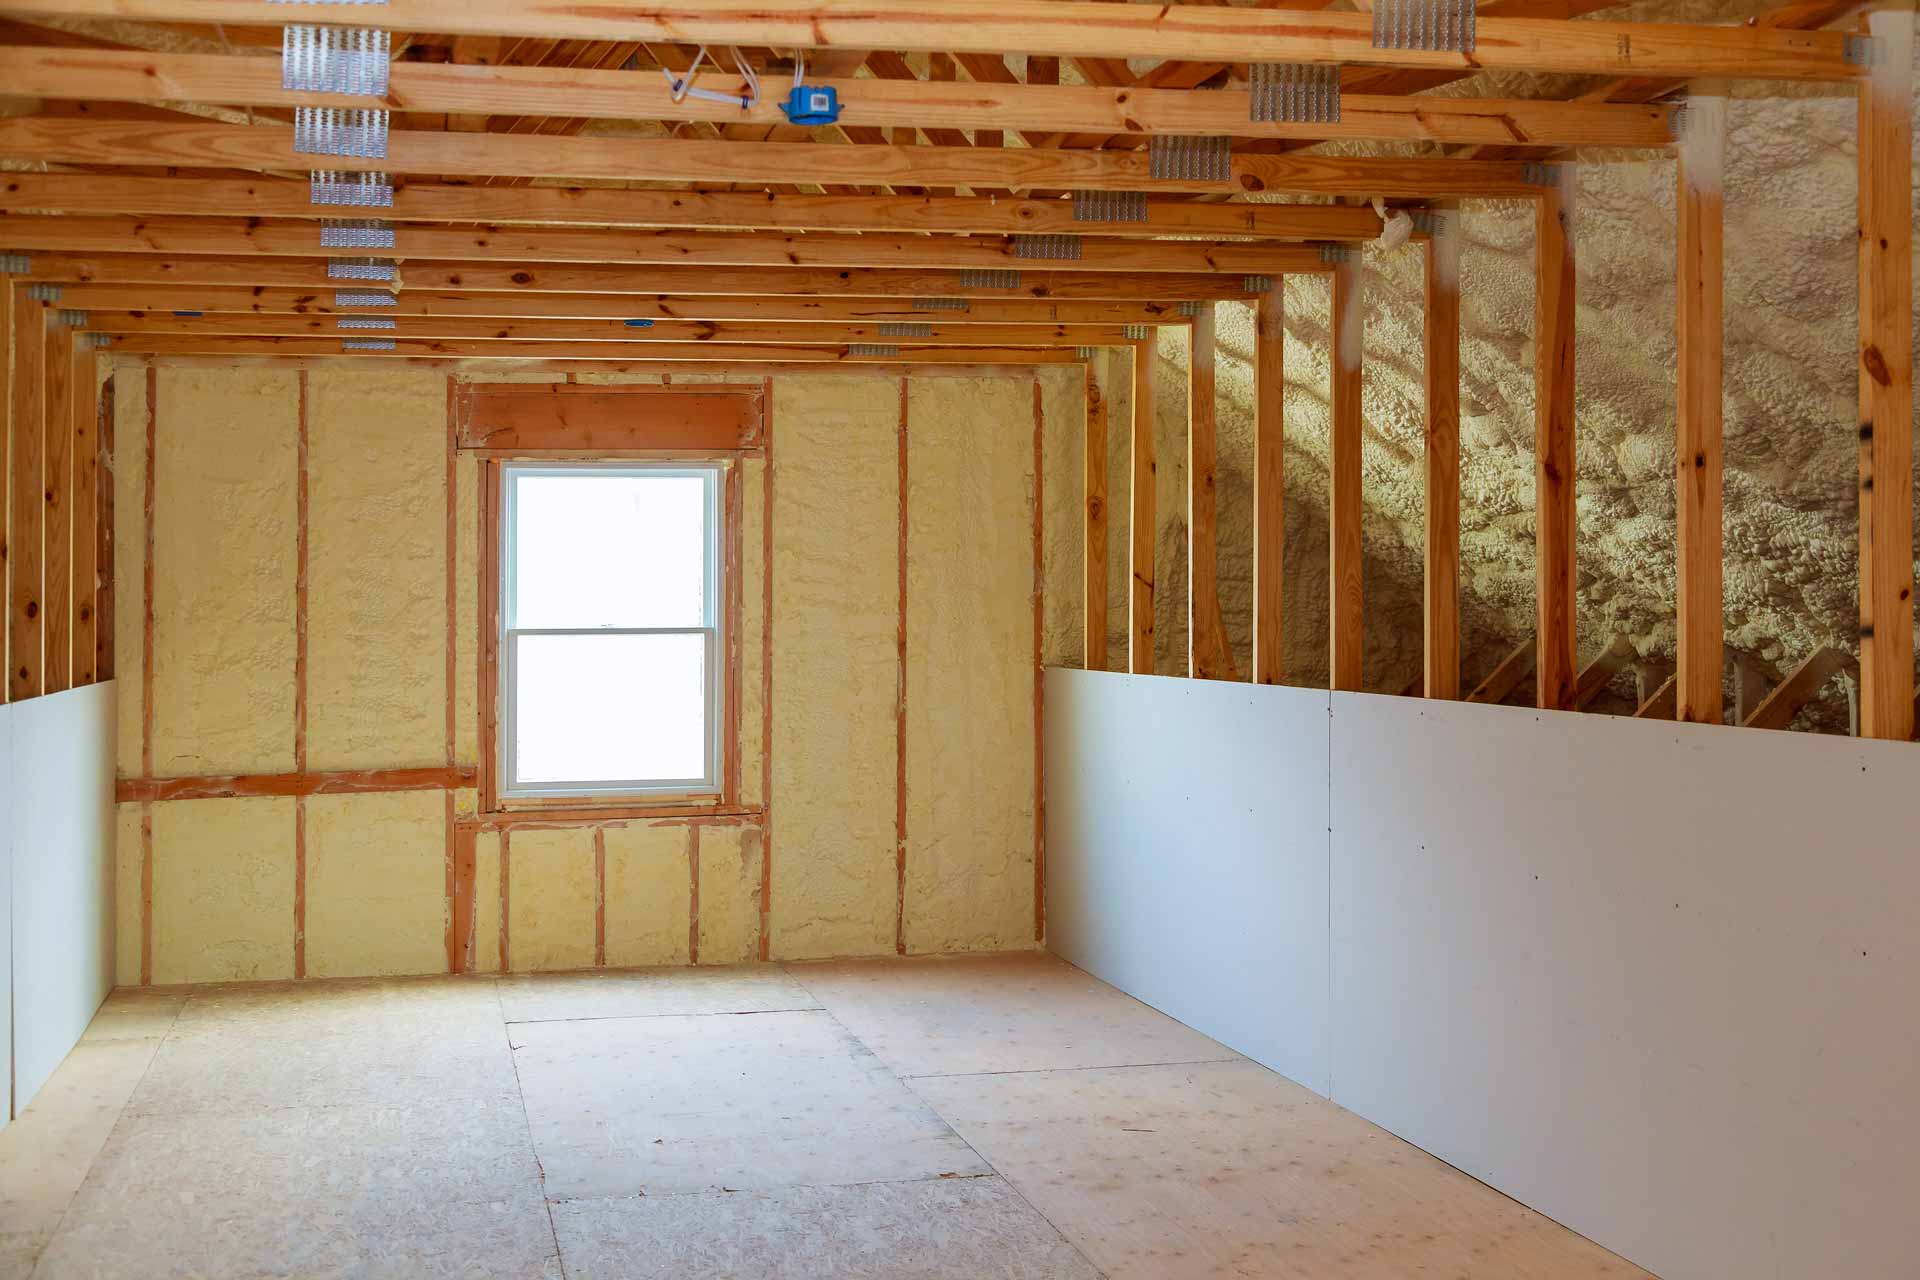 New construction house with spray foam insulation